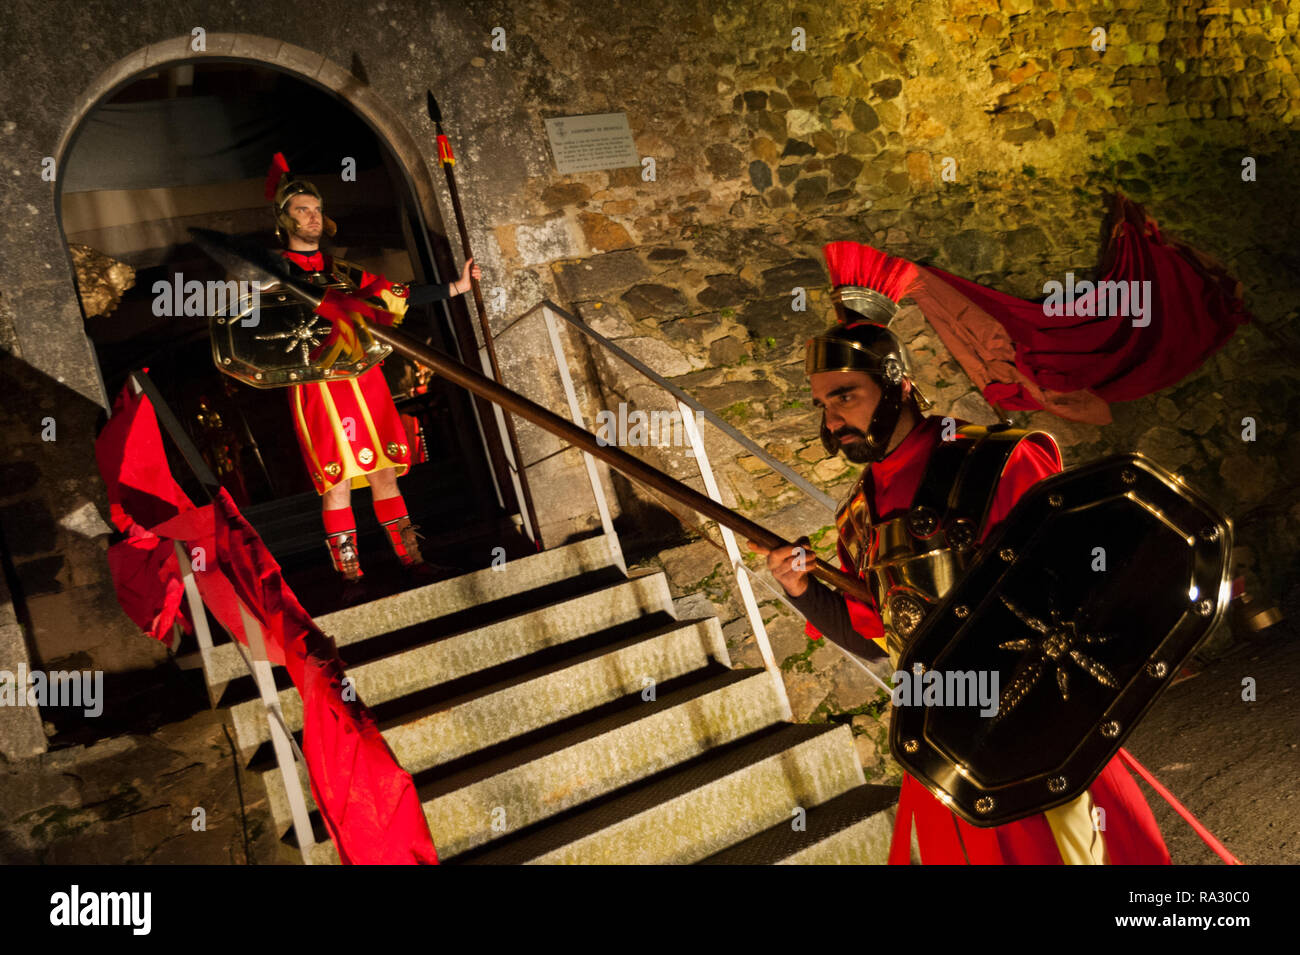 Brunyola, Girona, Italy. 30th Dec, 2018.  The town of Brunyola in Girona hosts the 37th edition of its traditional living crib with almost a kilometer of travel where more than 200 actors and technicians carry out a representation of different scenes and trades of the time. Charlie Perez/Alamy Live News Stock Photo